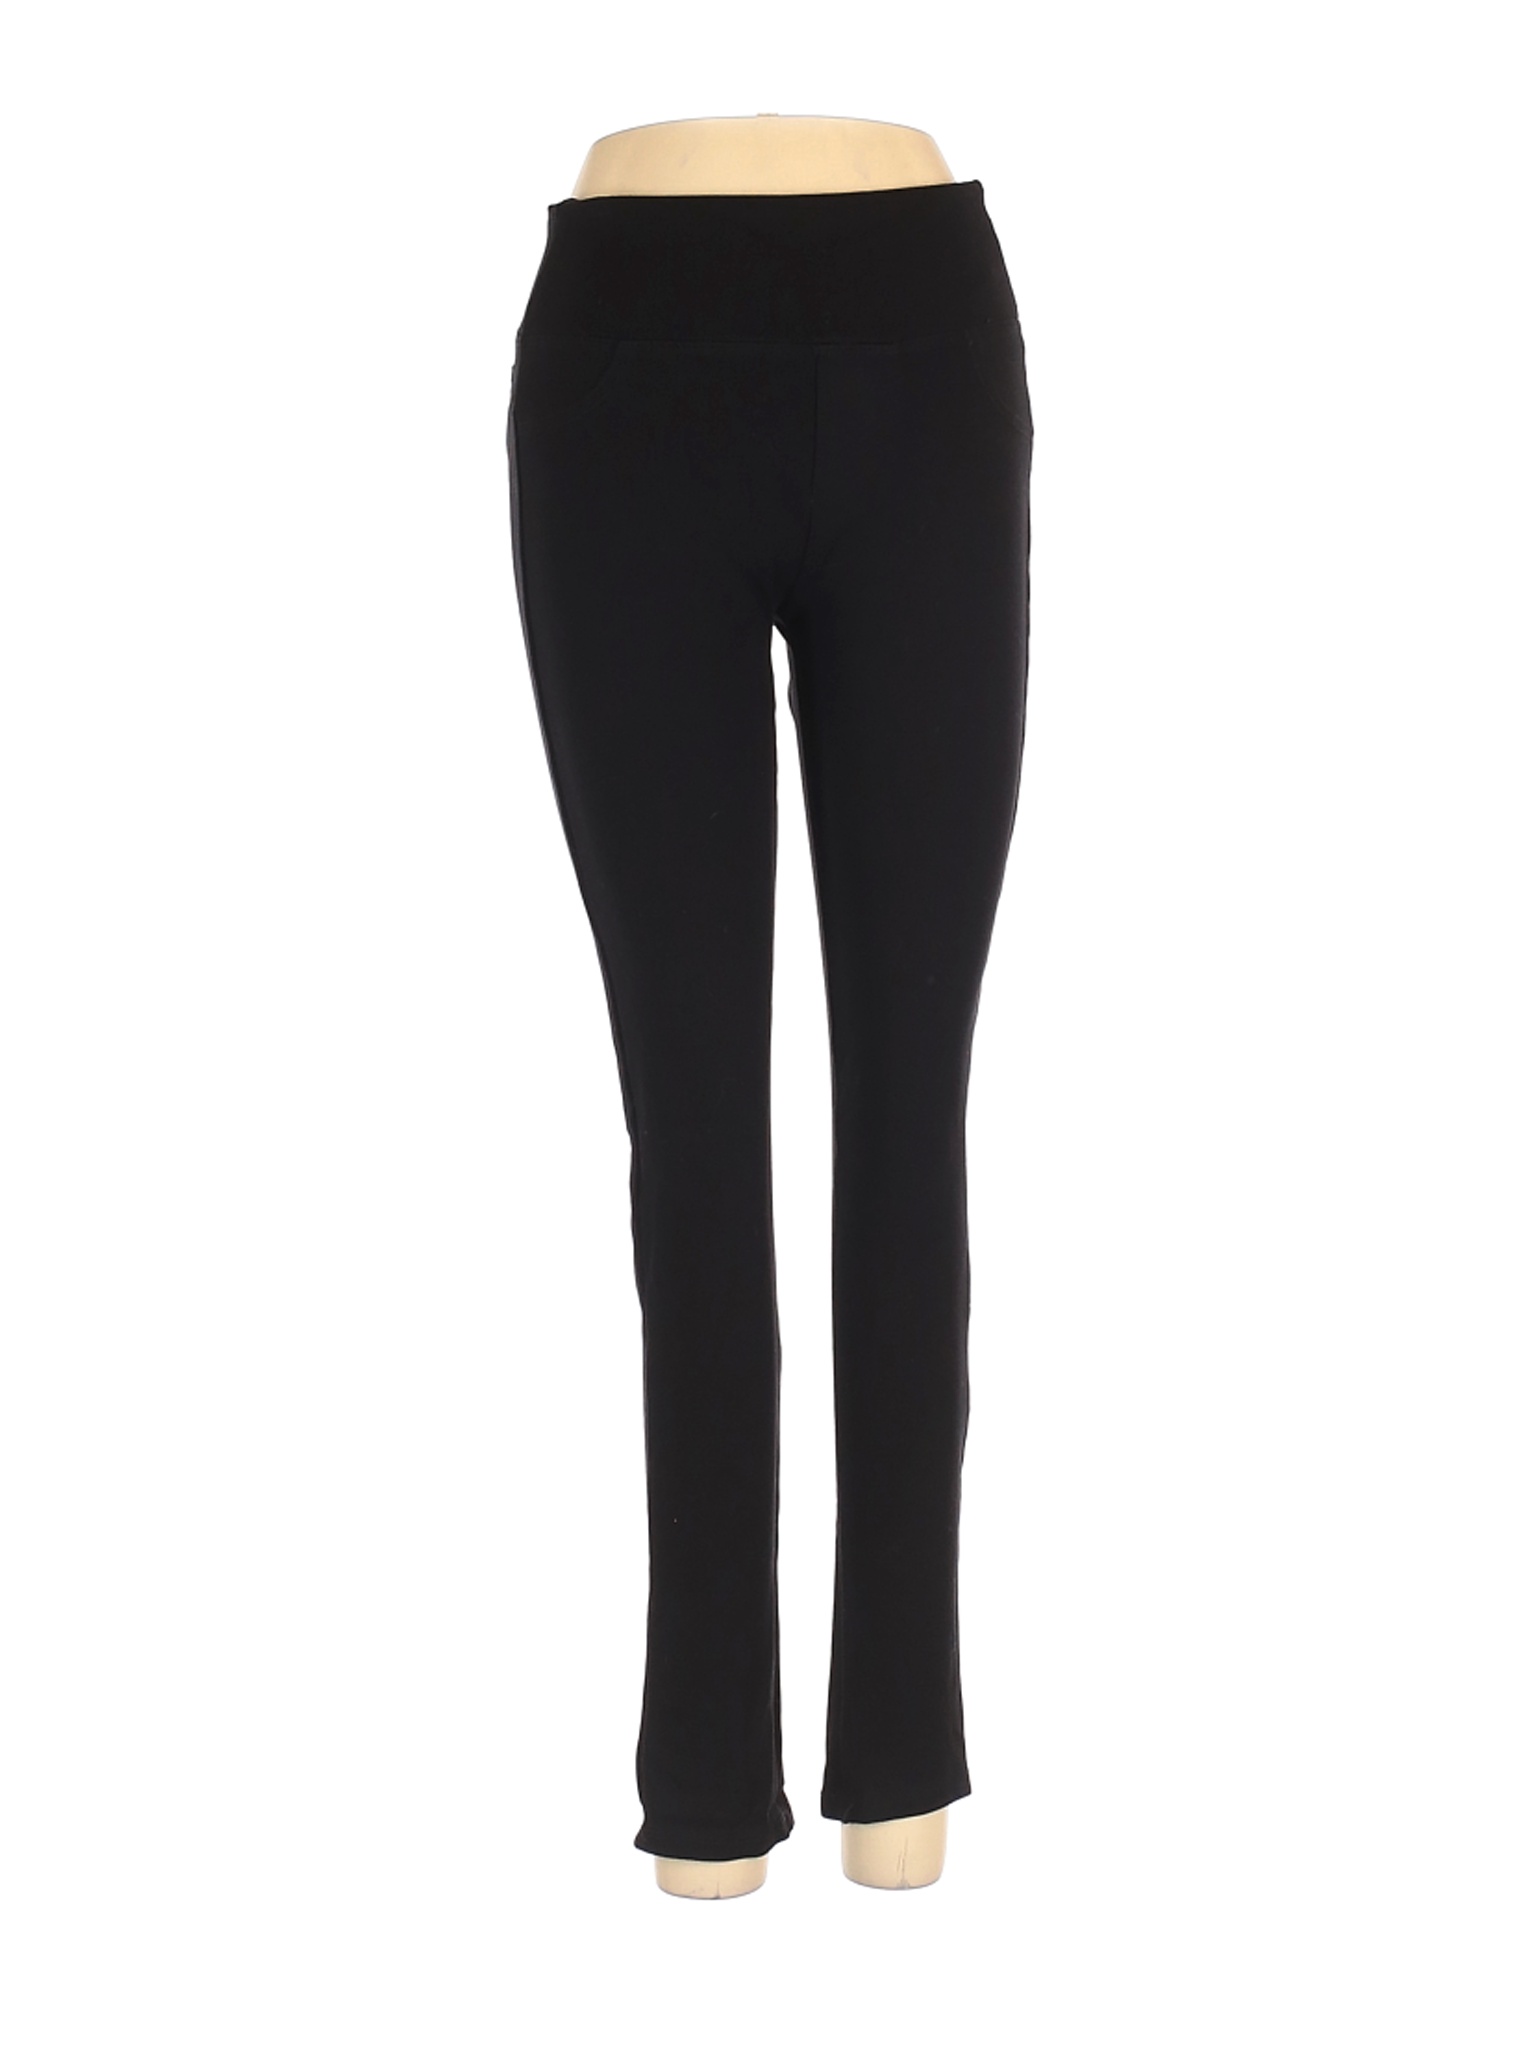 Shinestar Knit Stretch Flare Pant - Women's Pants in Black